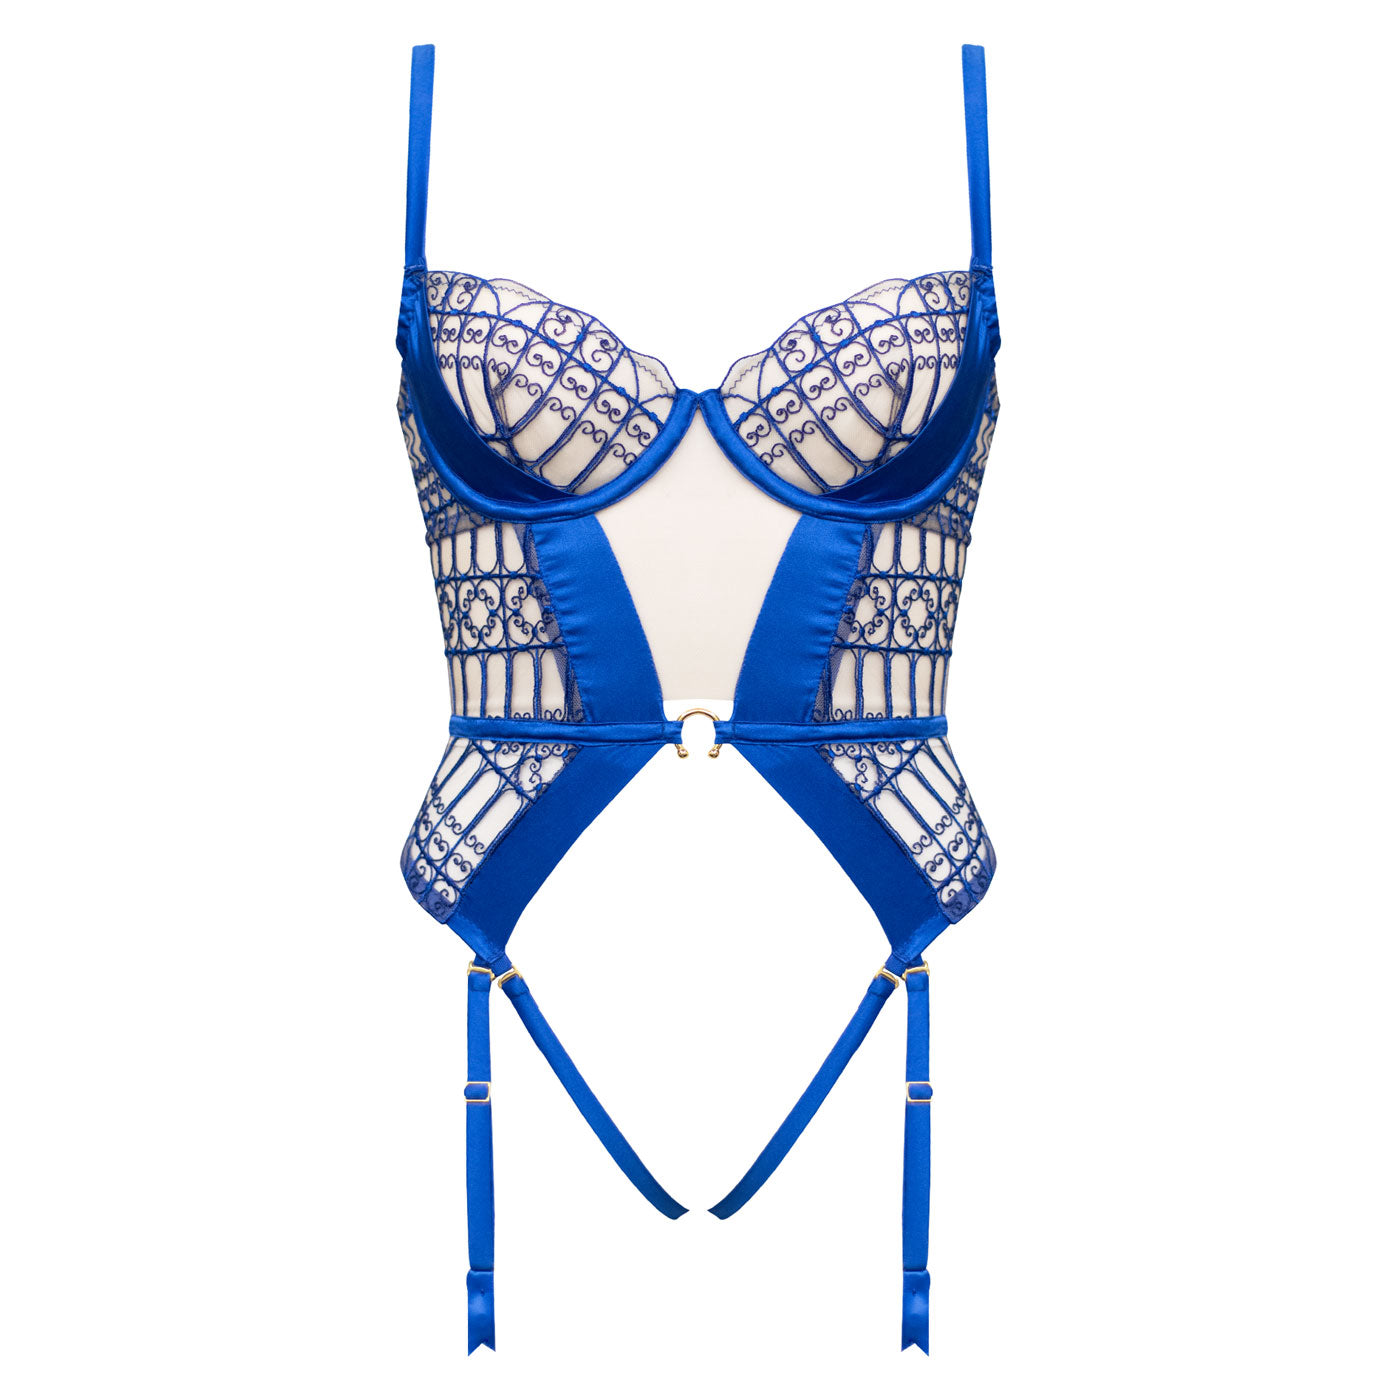 Luxury Ethical Lingerie - Embroidered Lingerie - Studio Pia